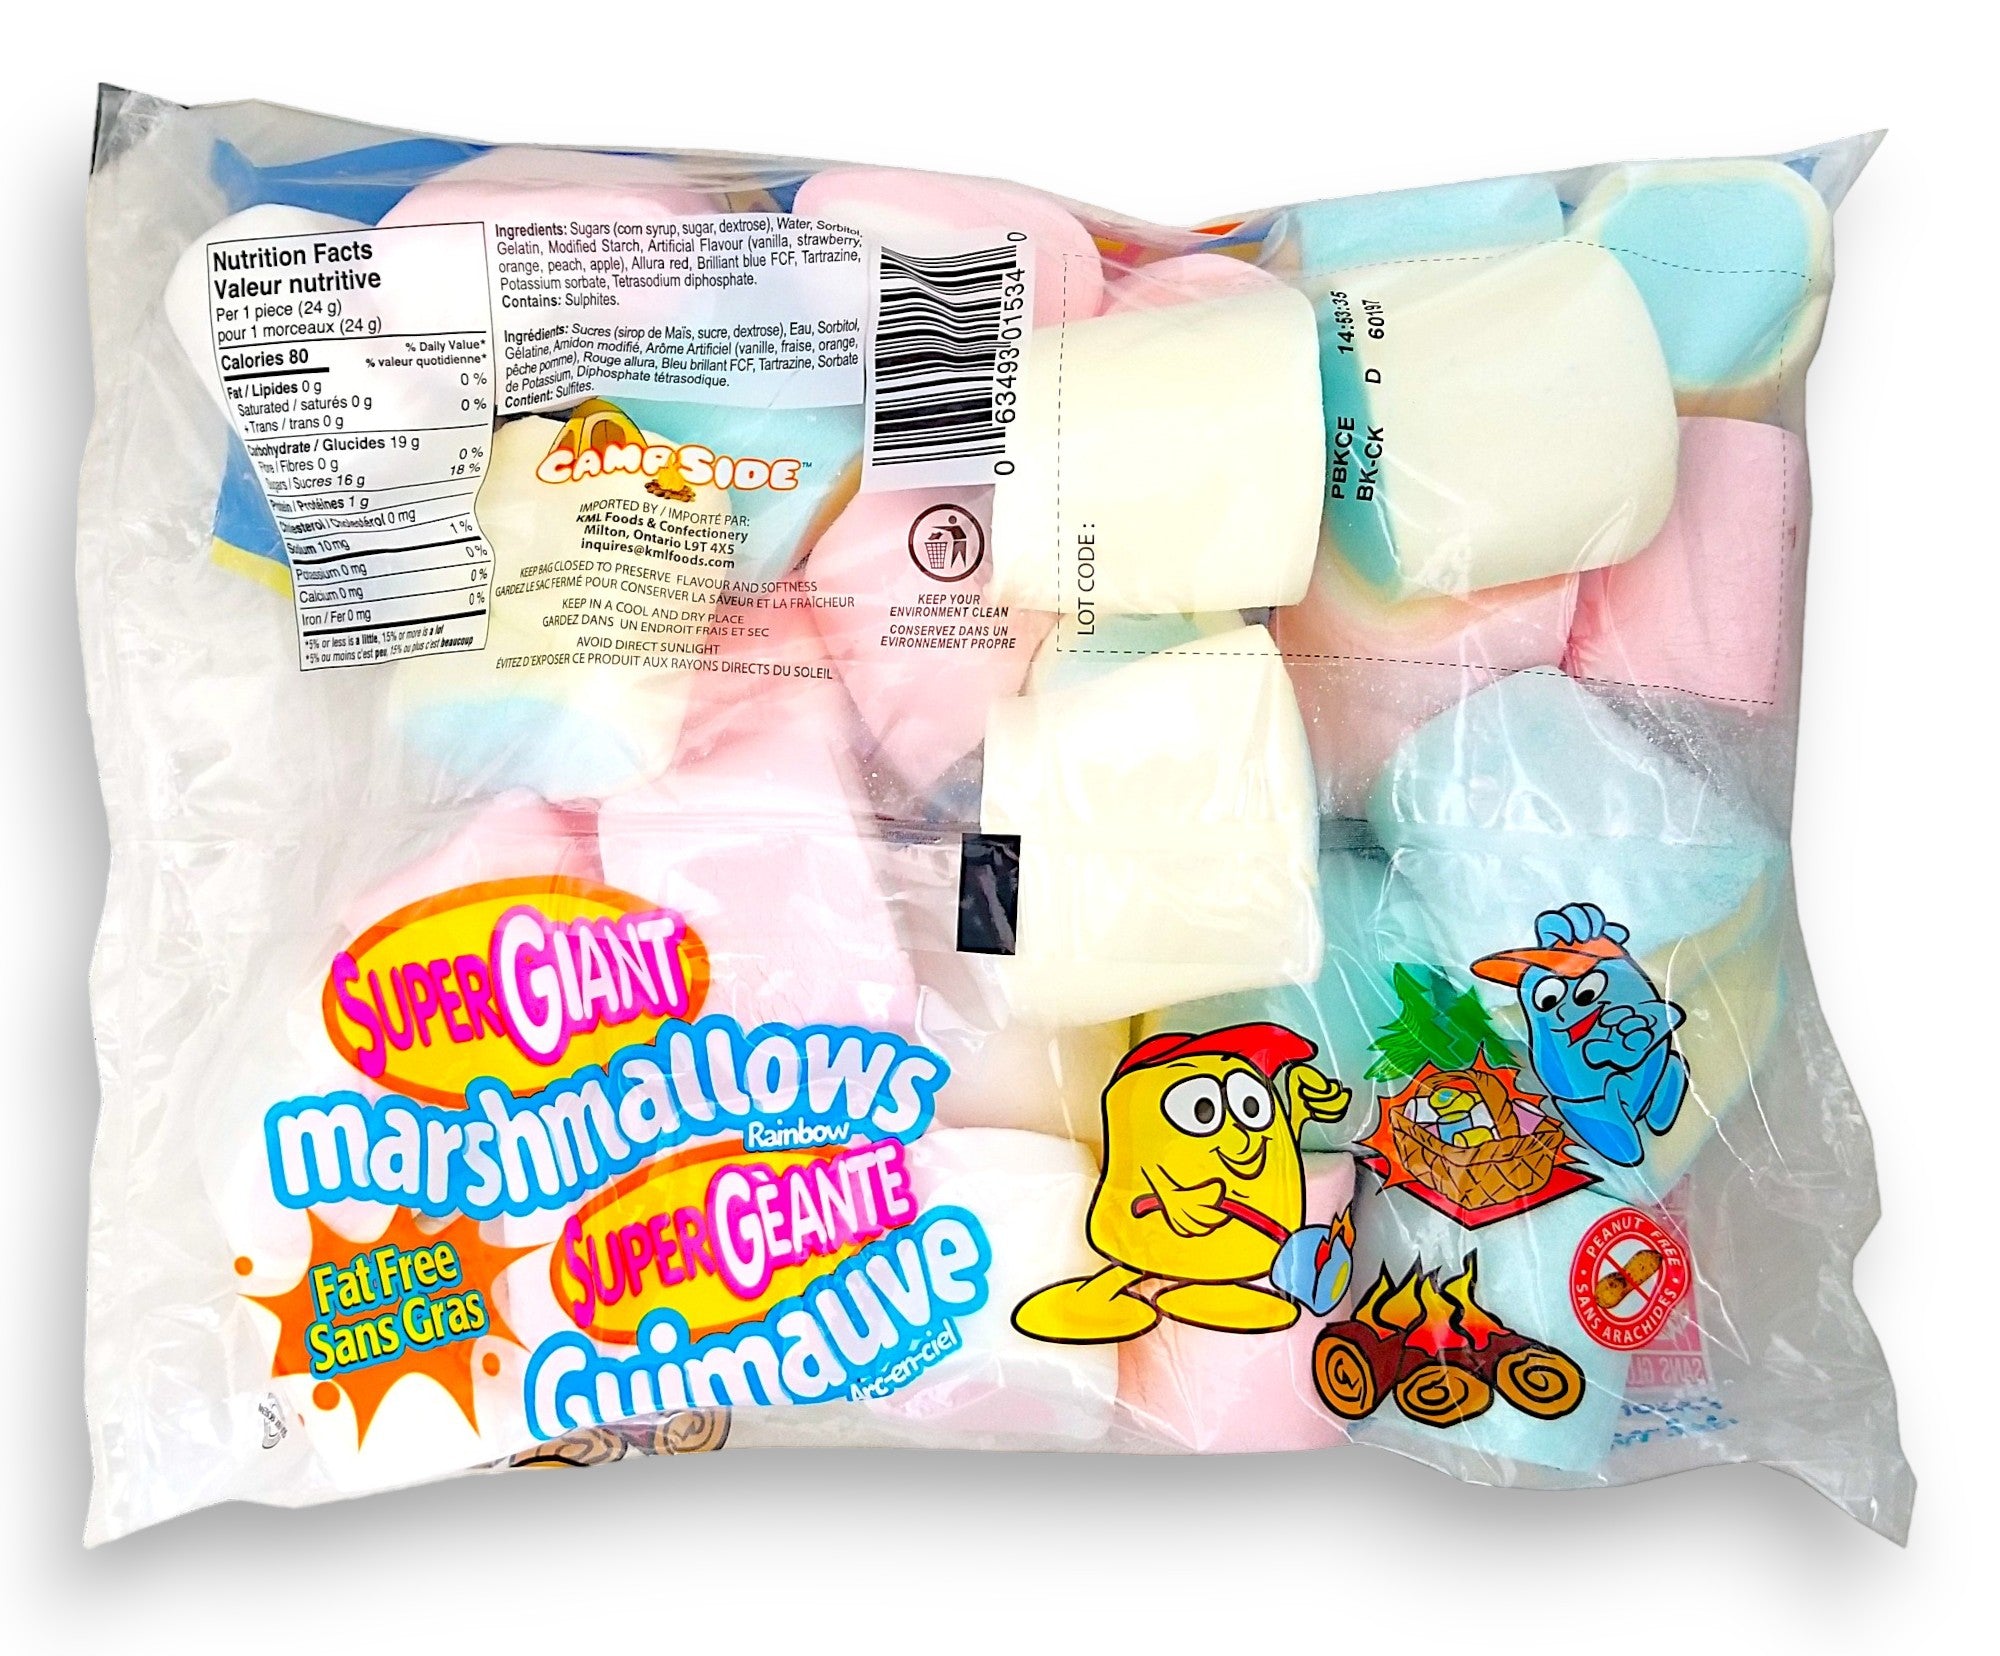 Campside Super Giant Rainbow Marshmallows, 700g, back of bag.